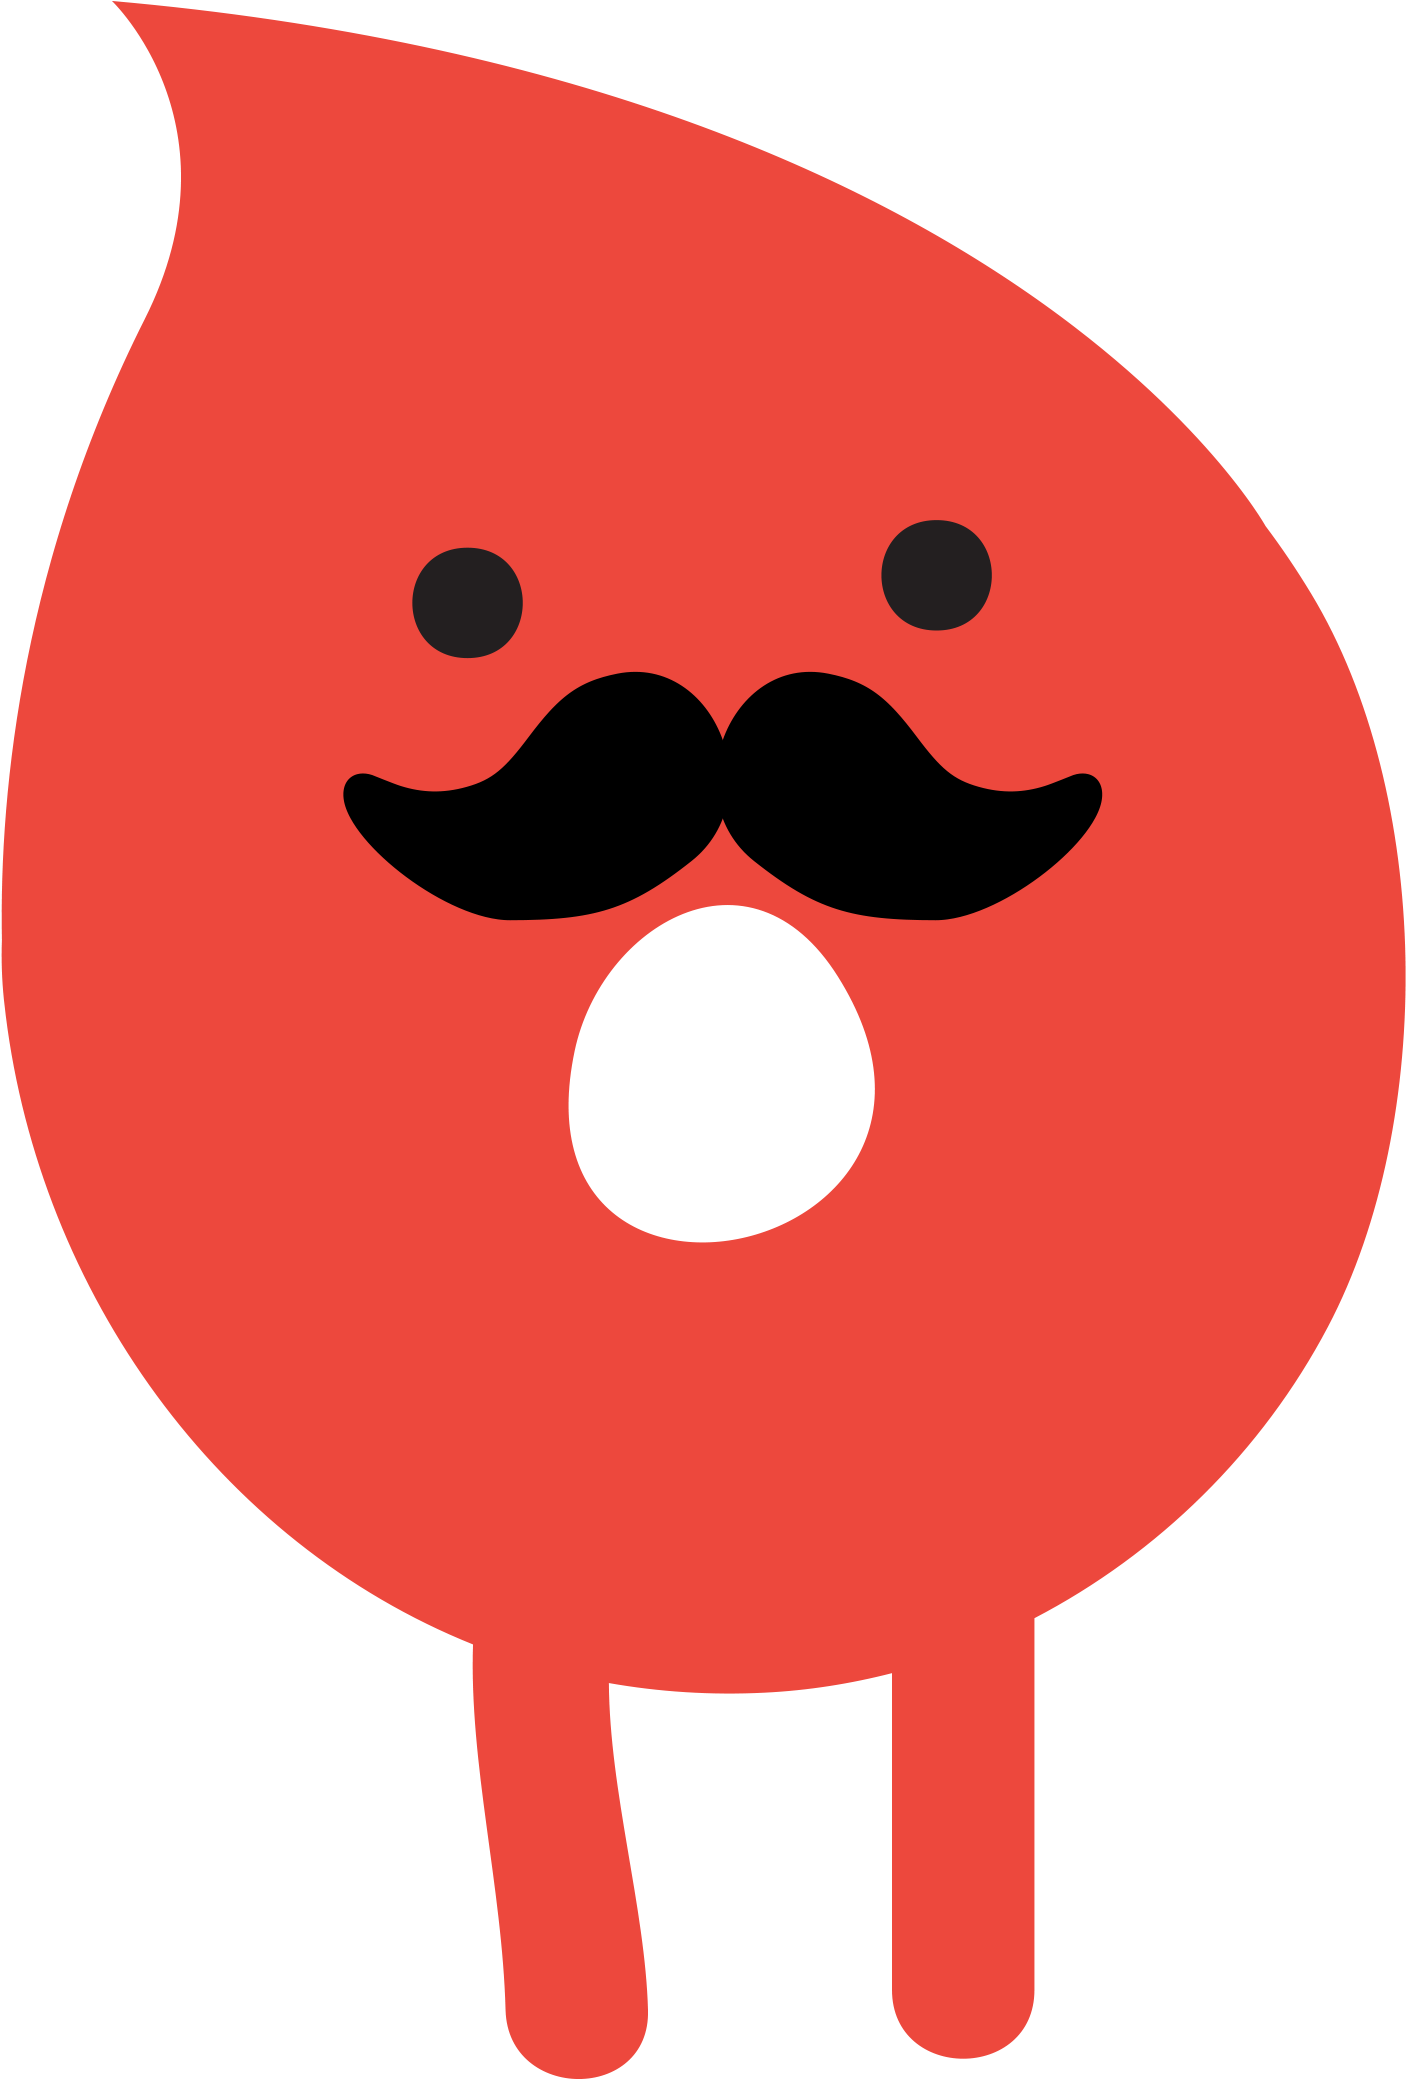 A Red Round Object With A Mustache